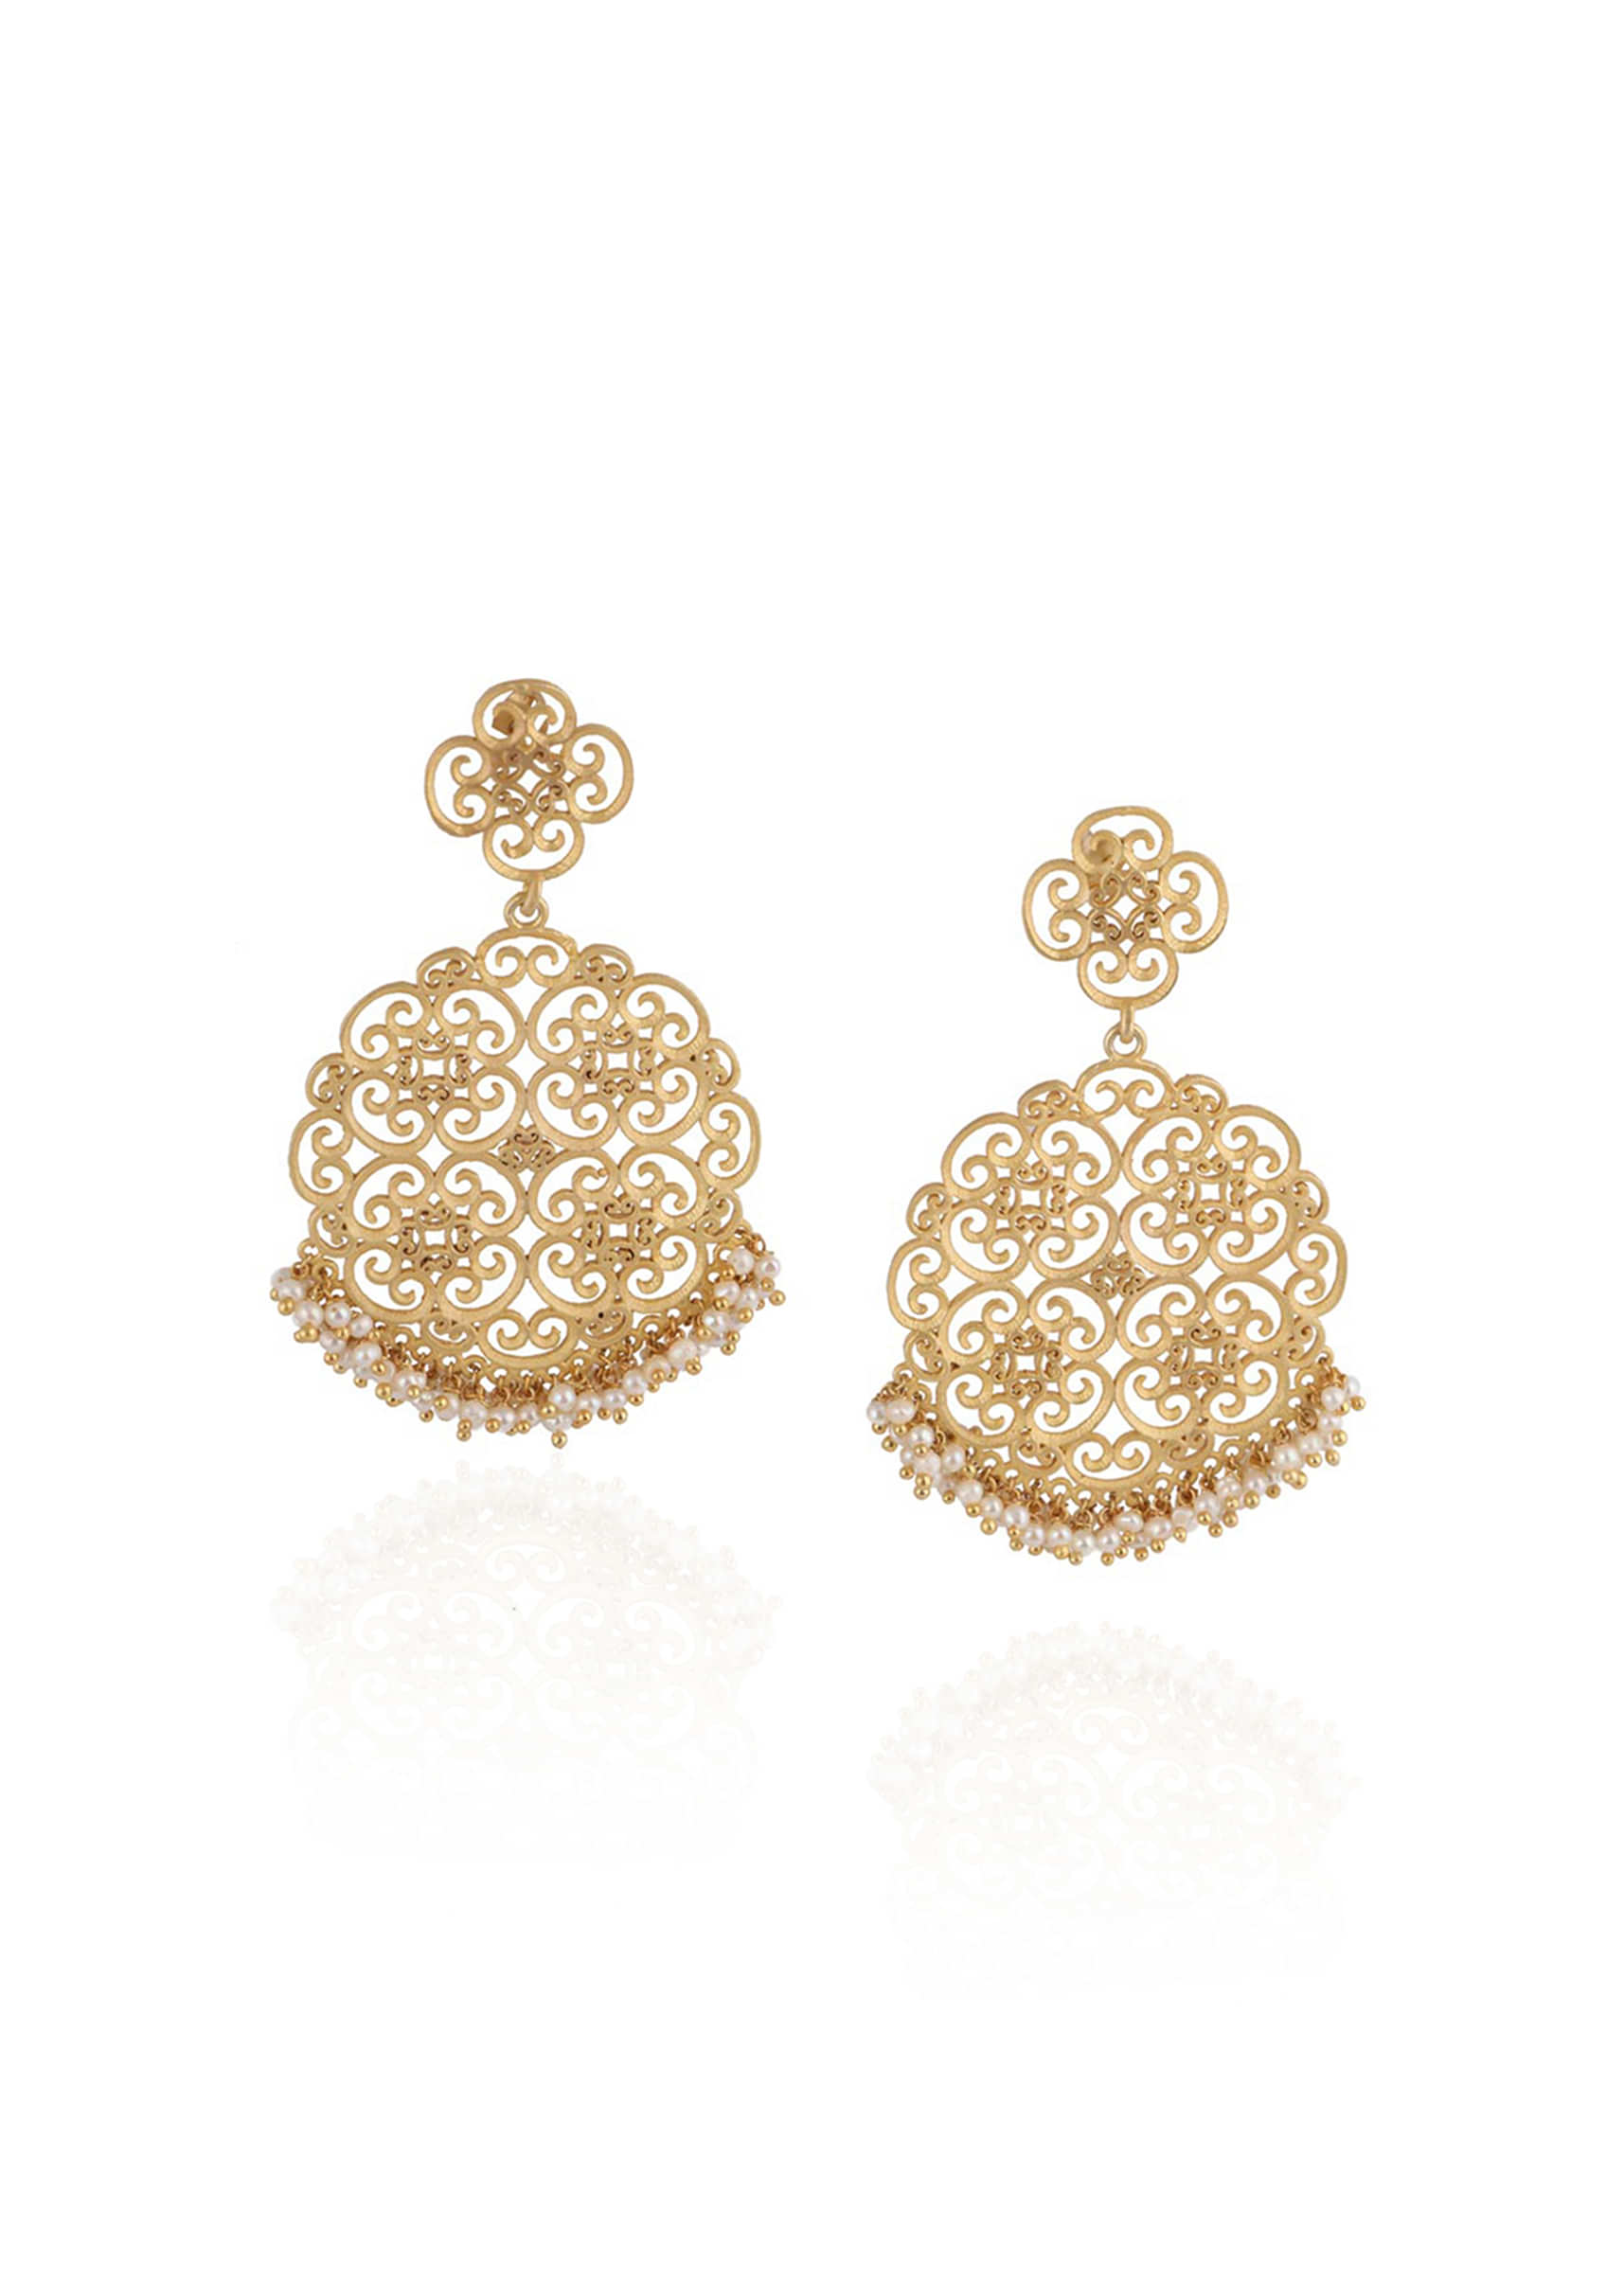 Gold Plated Oversized Disc Earrings With Delicate Filigree Detailing And Pearls By Zariin